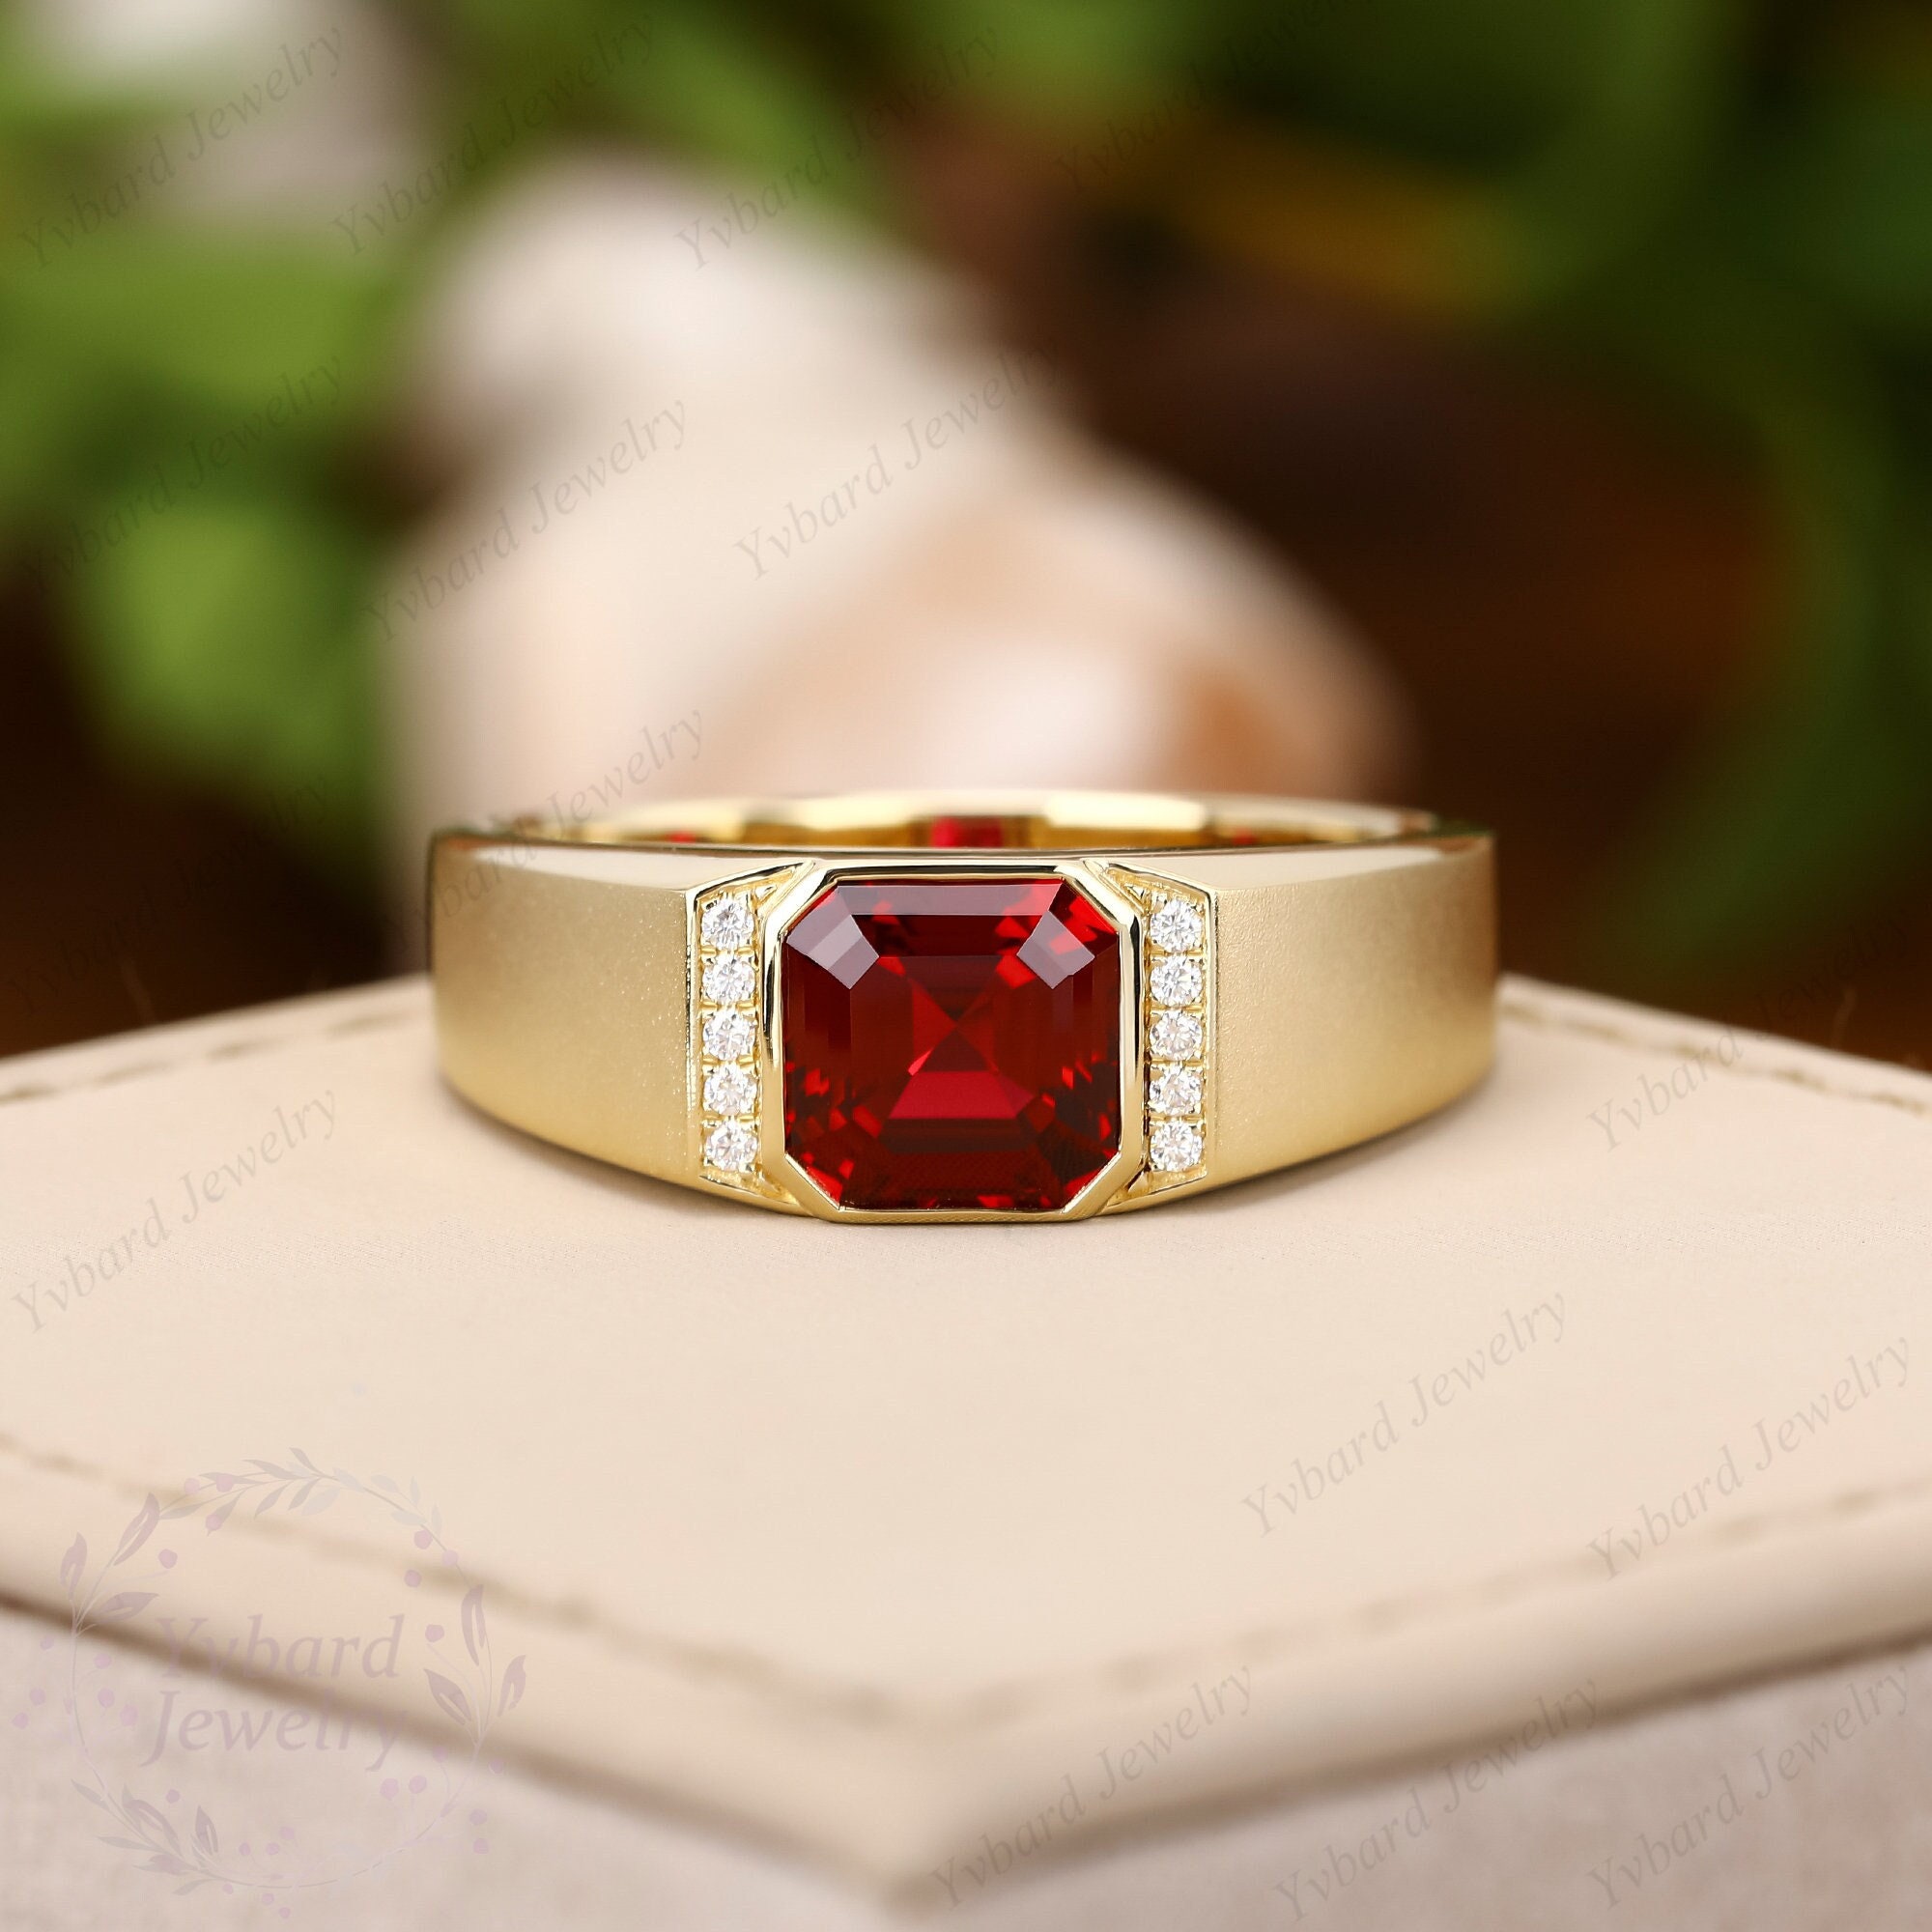 Citrine, Ruby and Diamond Mens Ring | First State Auctions Australia